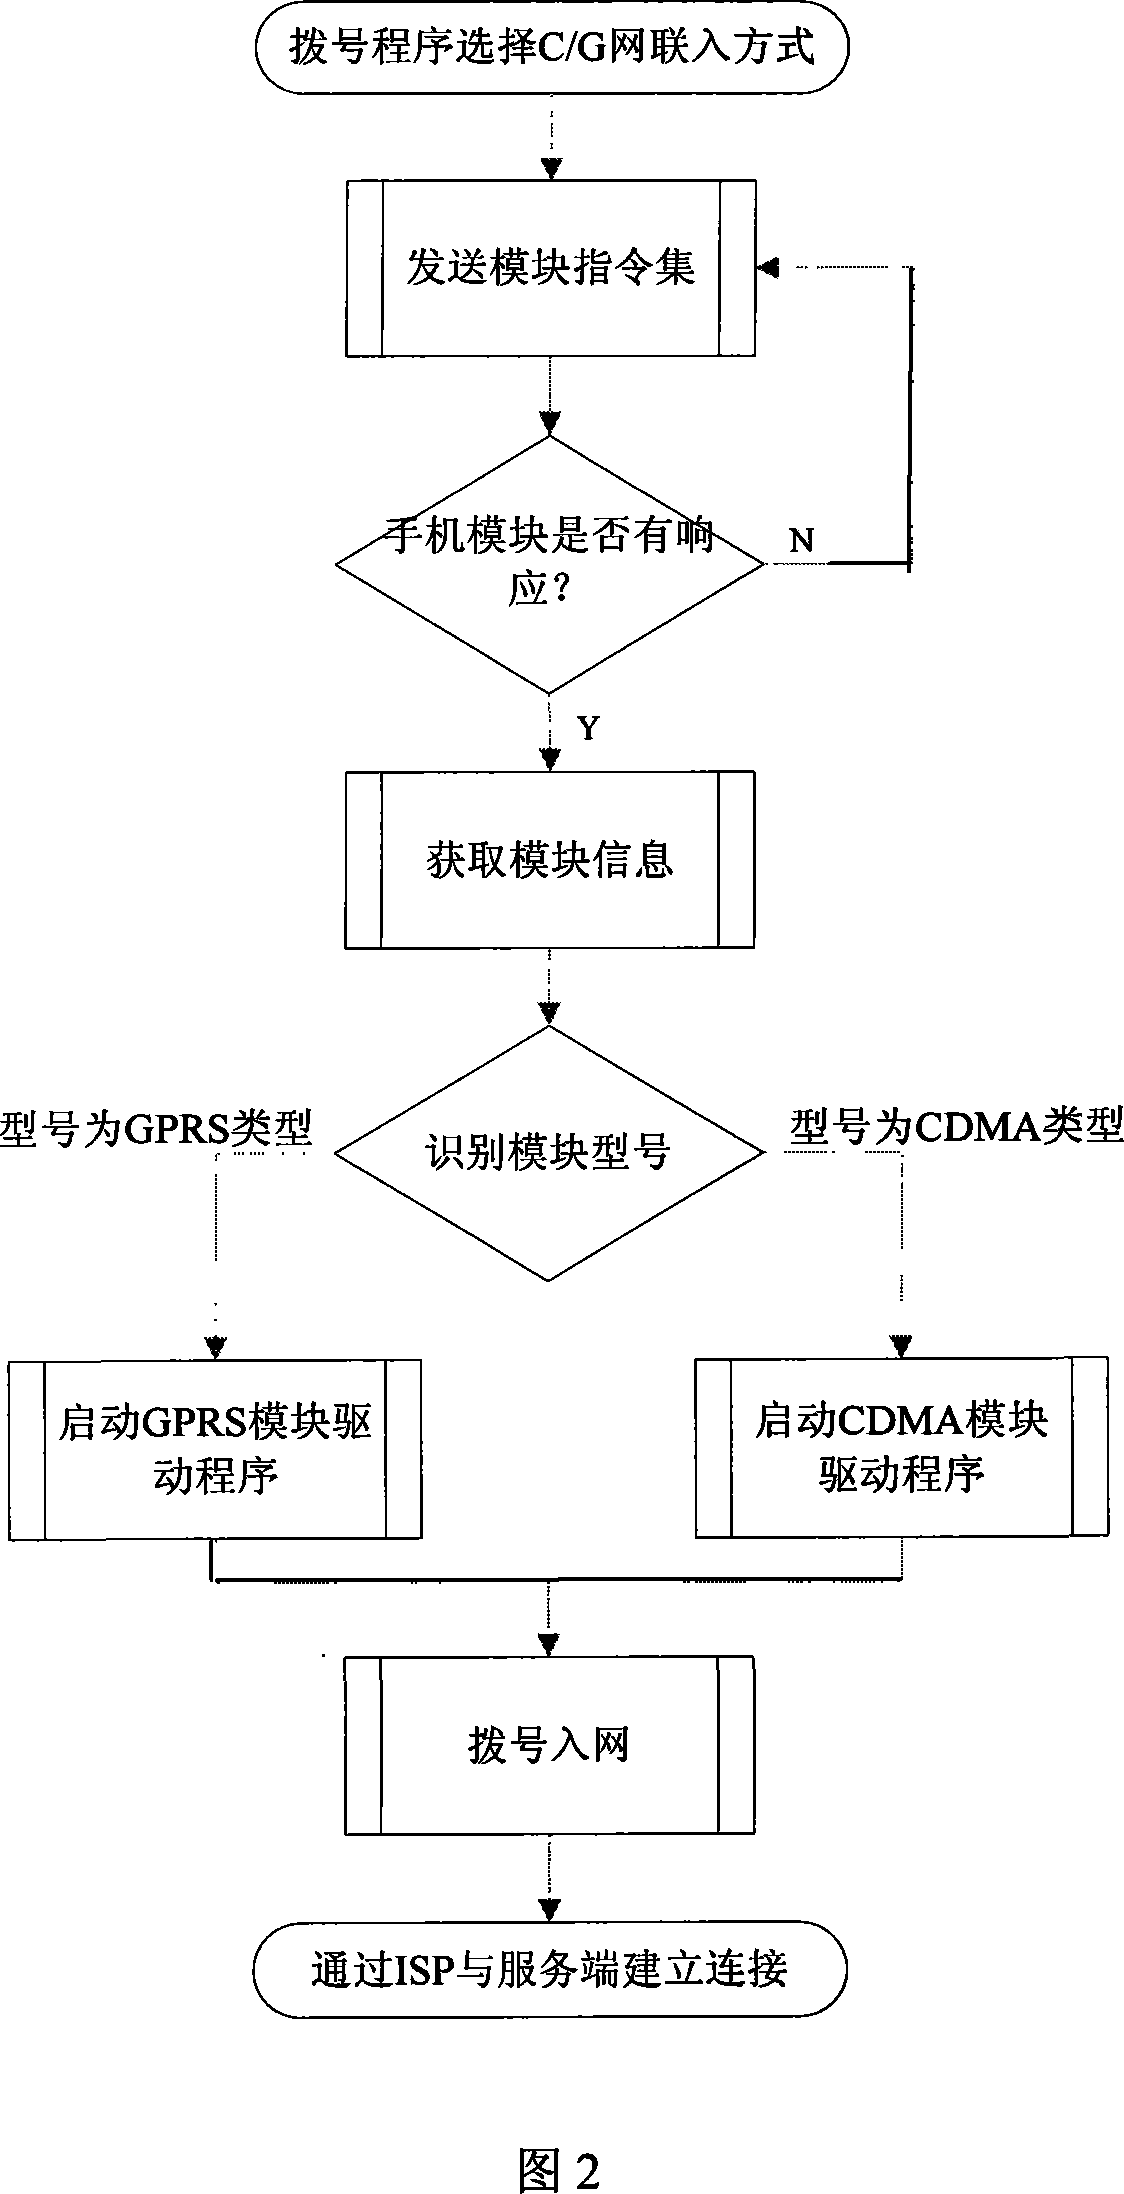 A CDMA/GPRS/ADSL self-selected communication method for gateway routing device